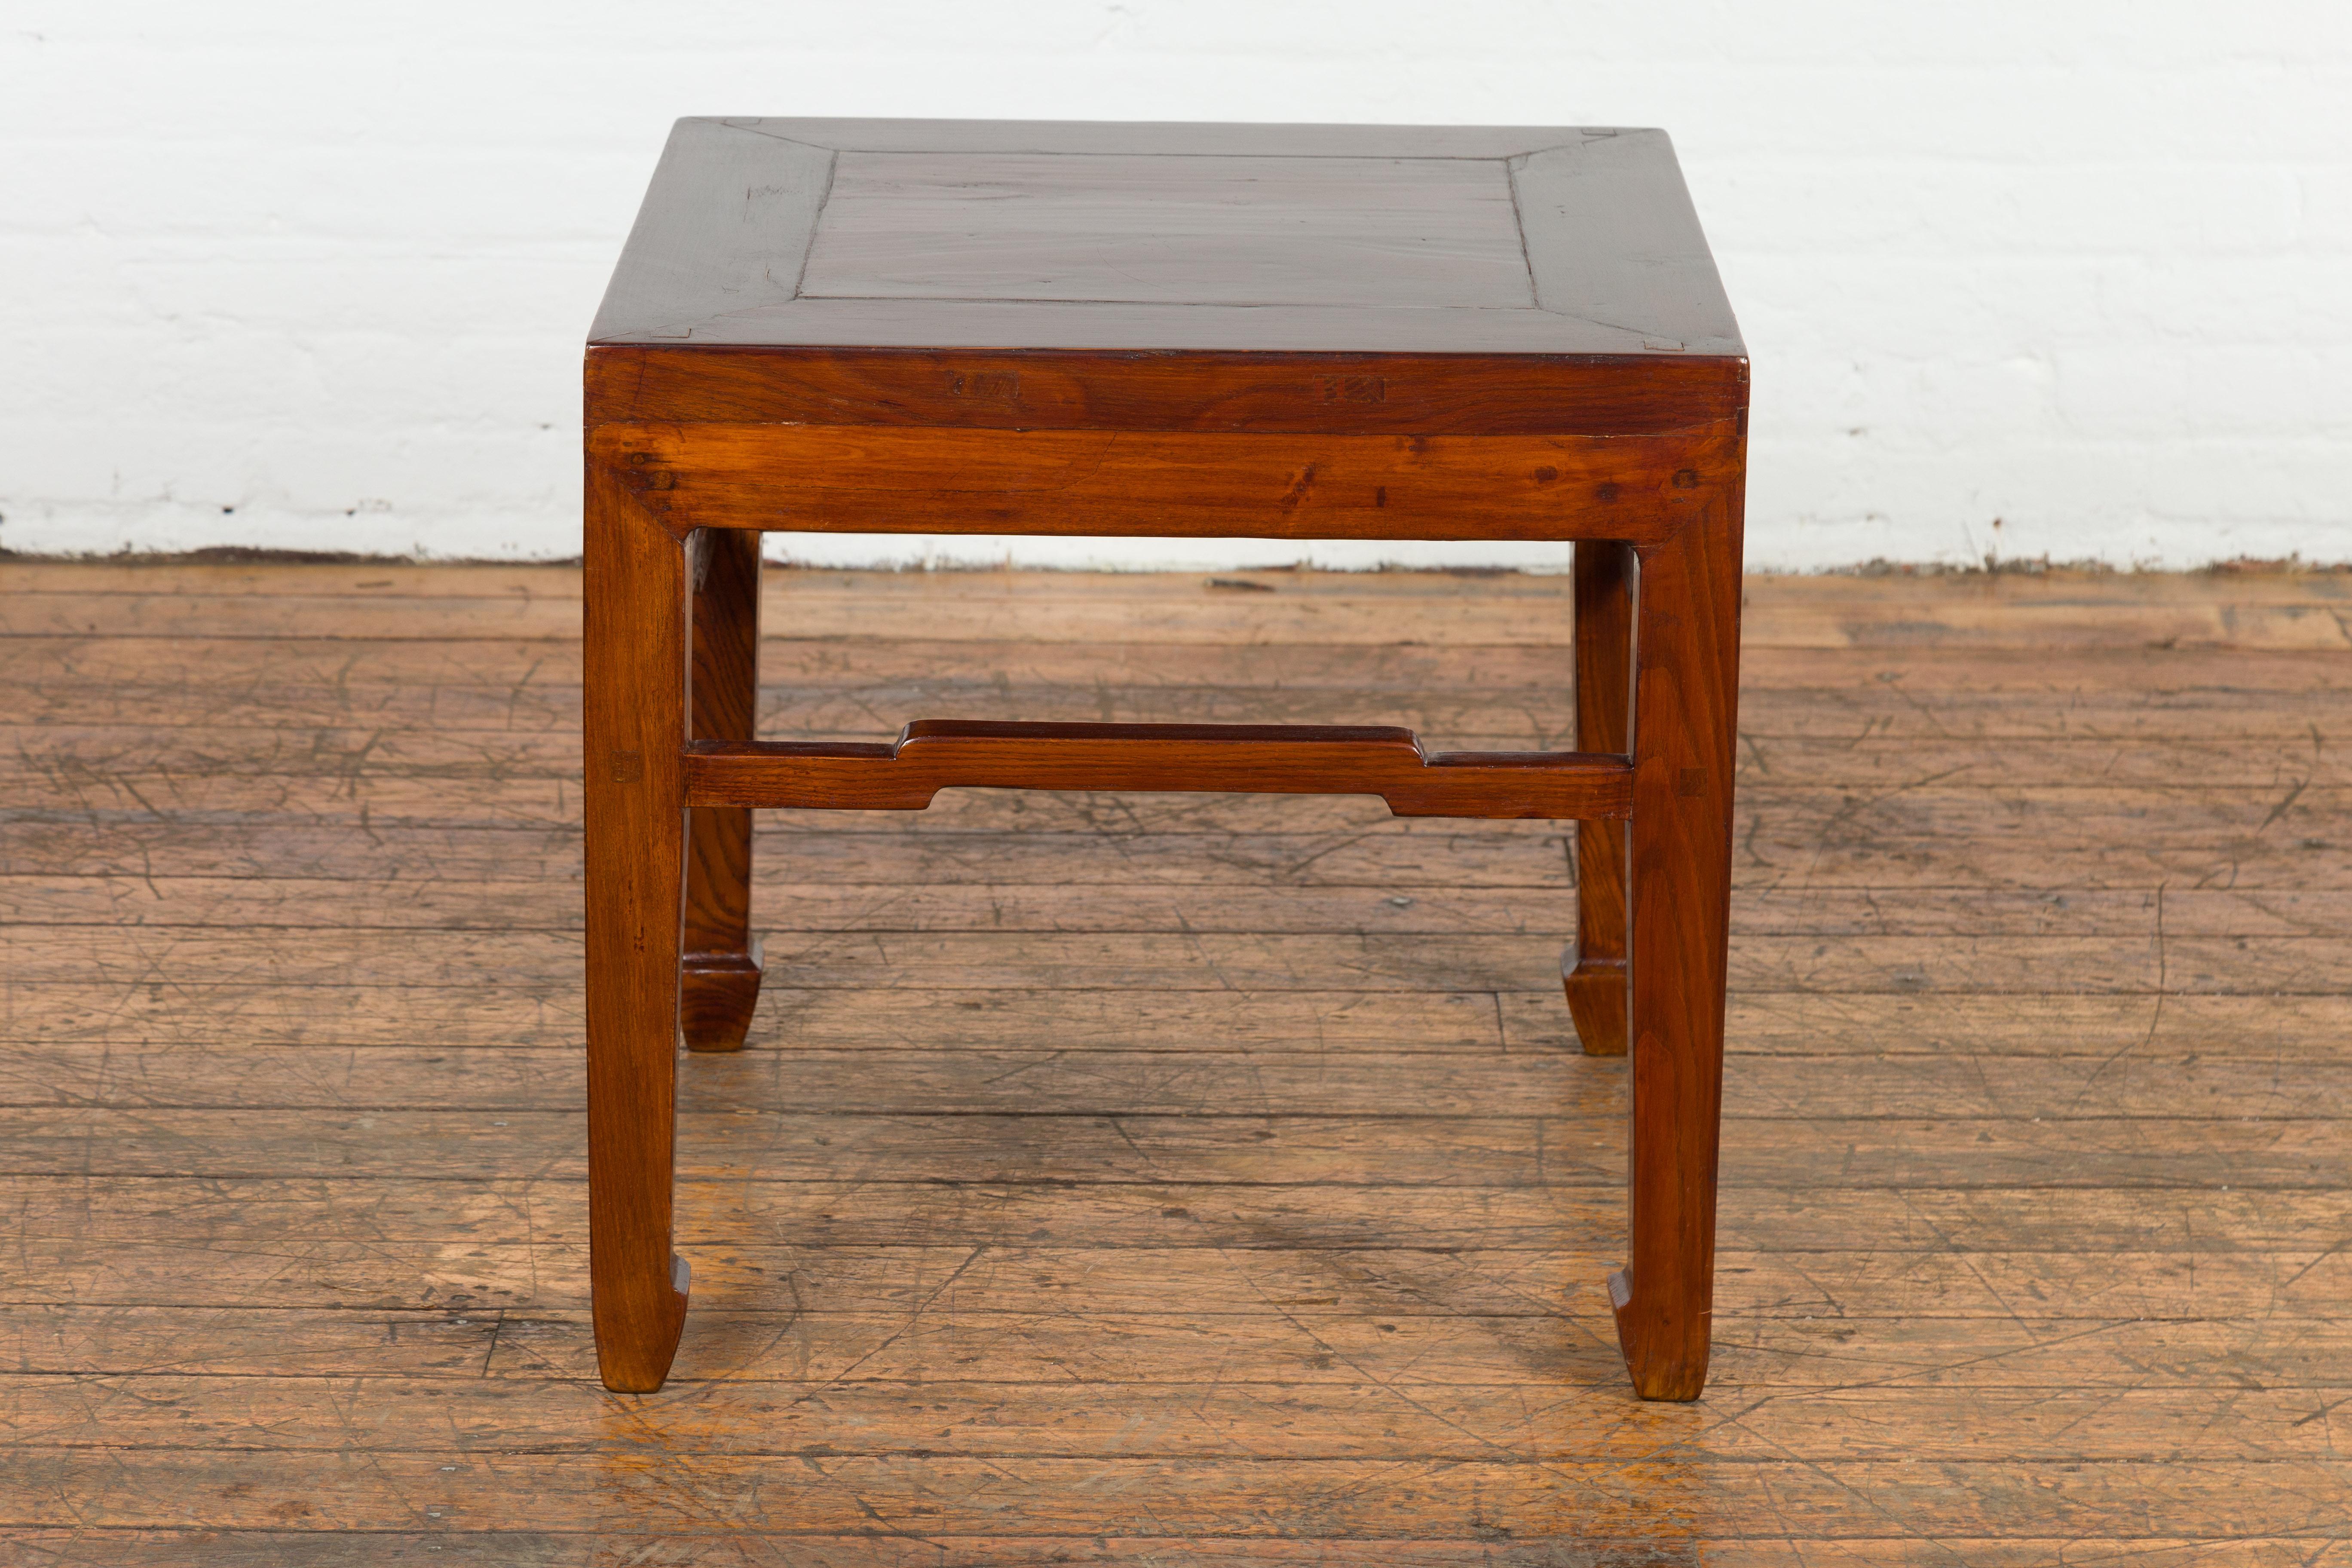 Chinese Qing Dynasty Period 19th Century Side Table with Humpback Stretchers For Sale 16